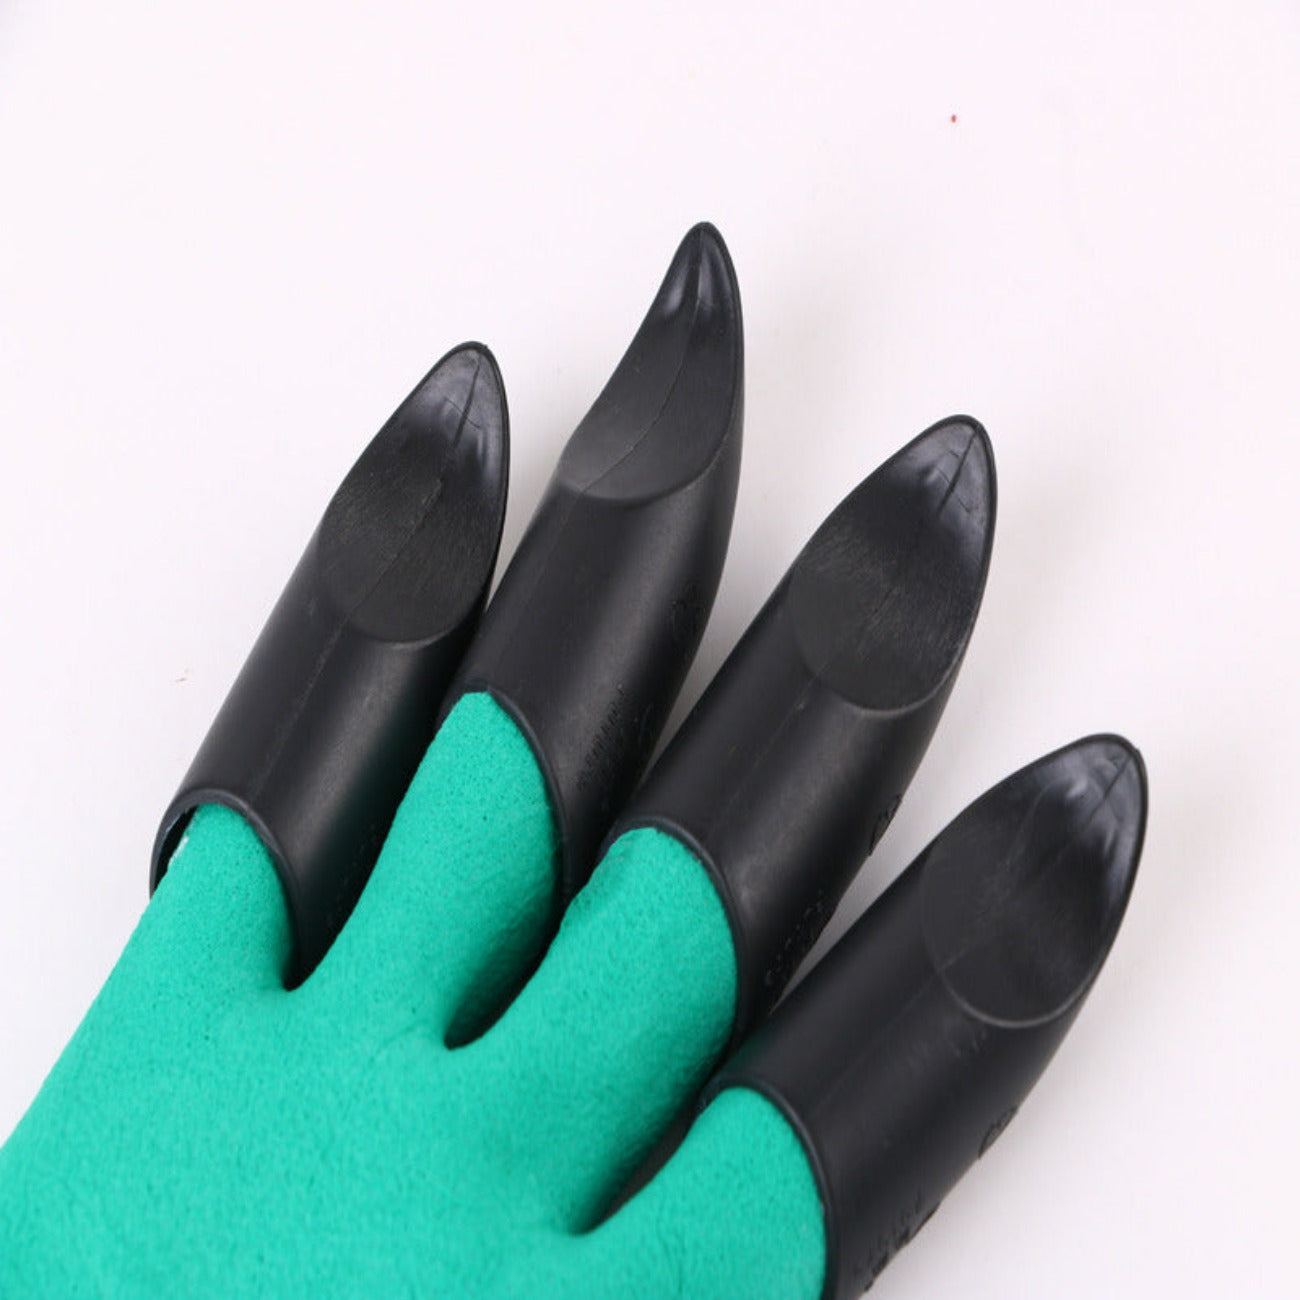 Clawed Gardening Gloves for Digging